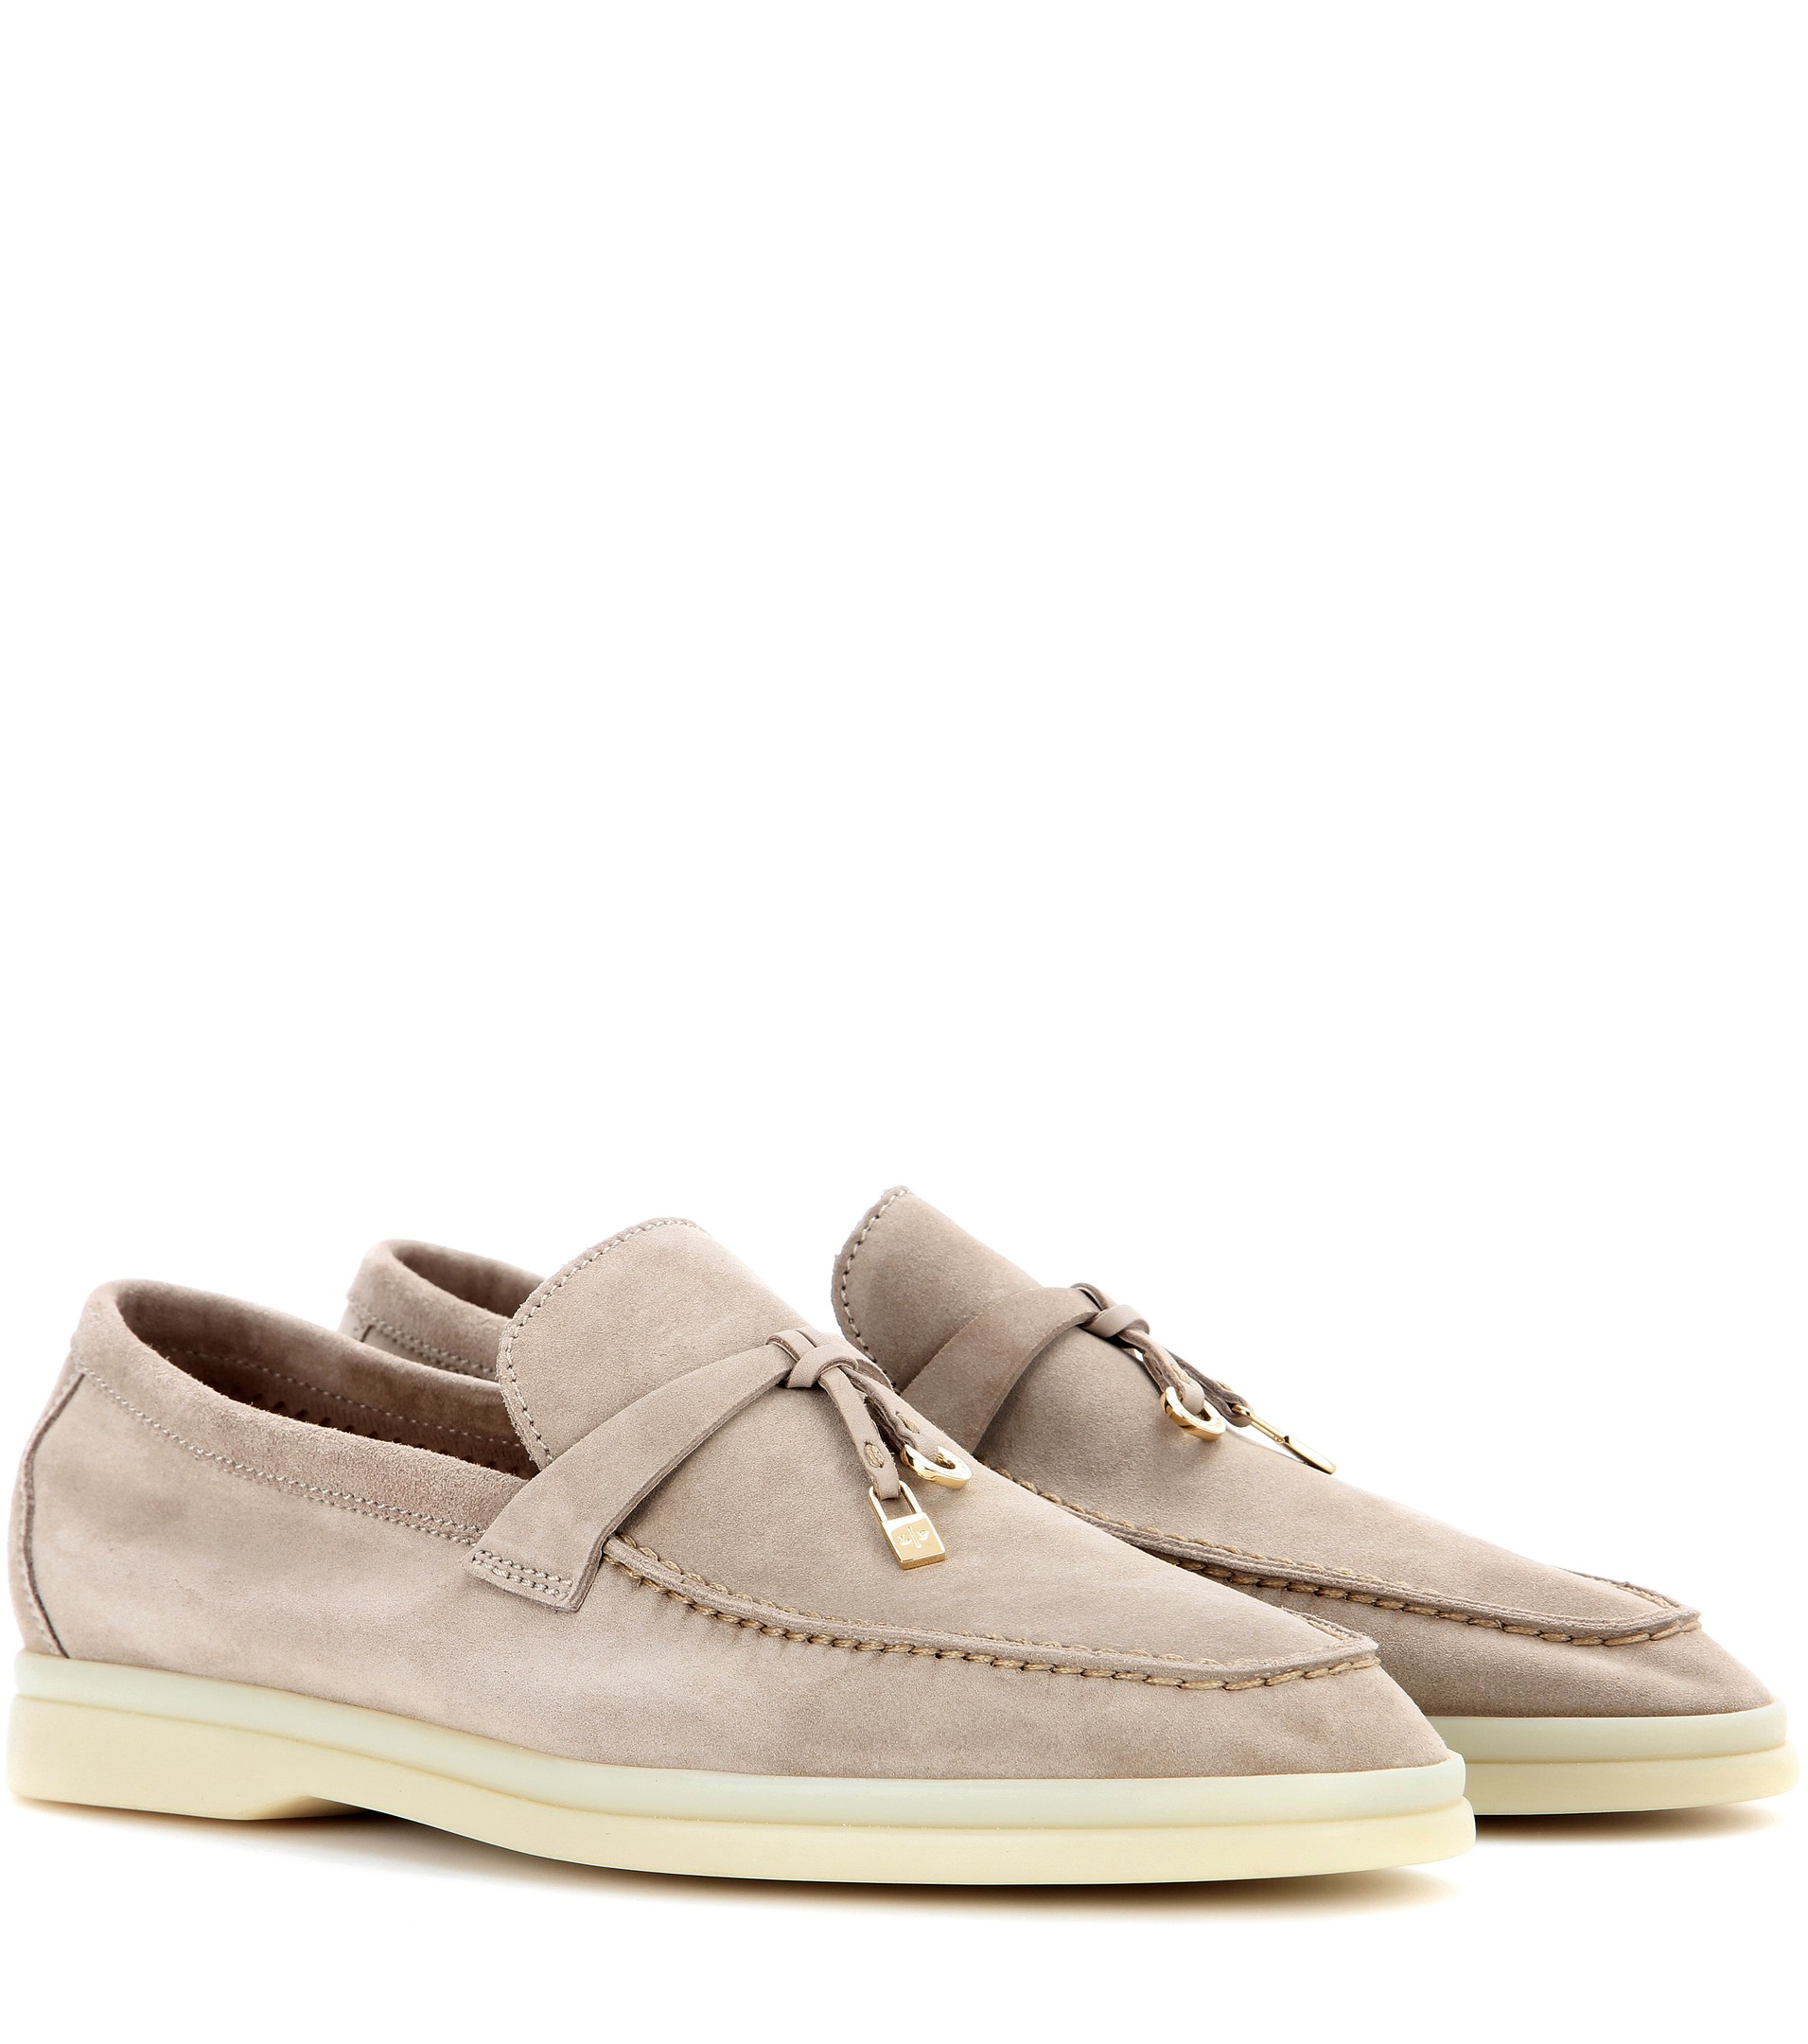 Lyst - Loro Piana Summer Charms Walk Suede Loafers in Natural